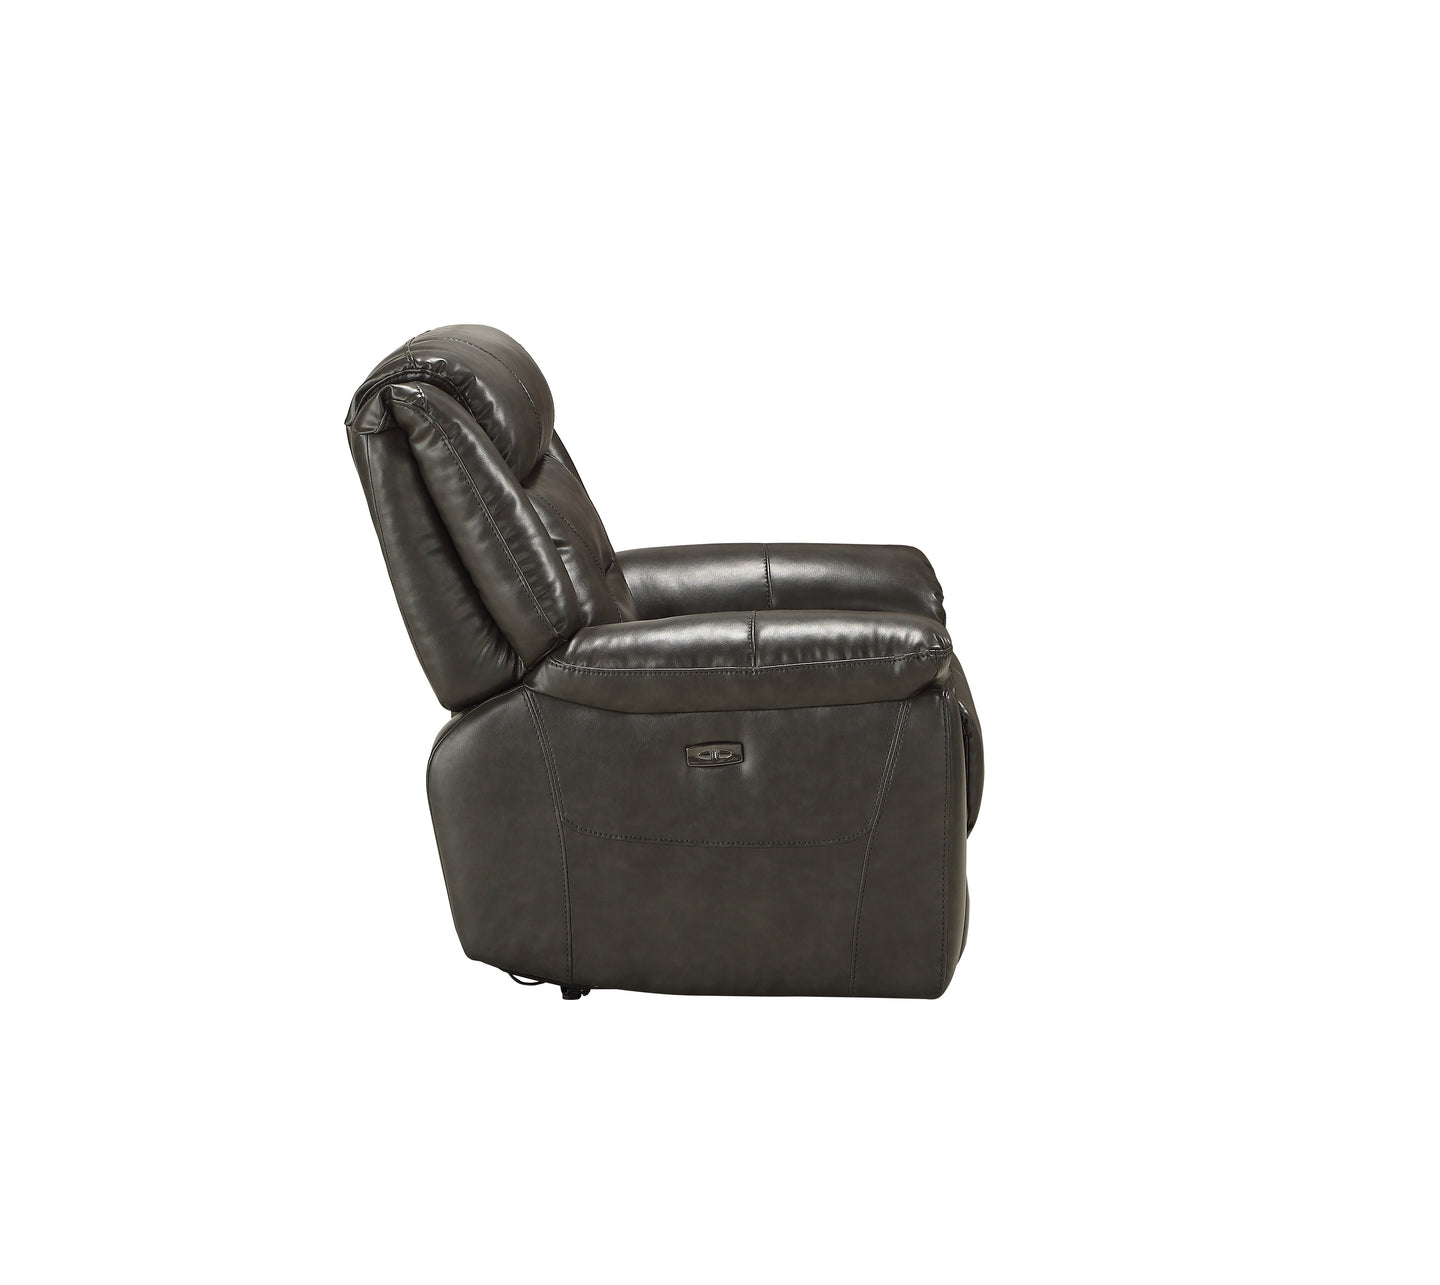 Imogen Gray Leather-Aire Recliner (Power Motion)